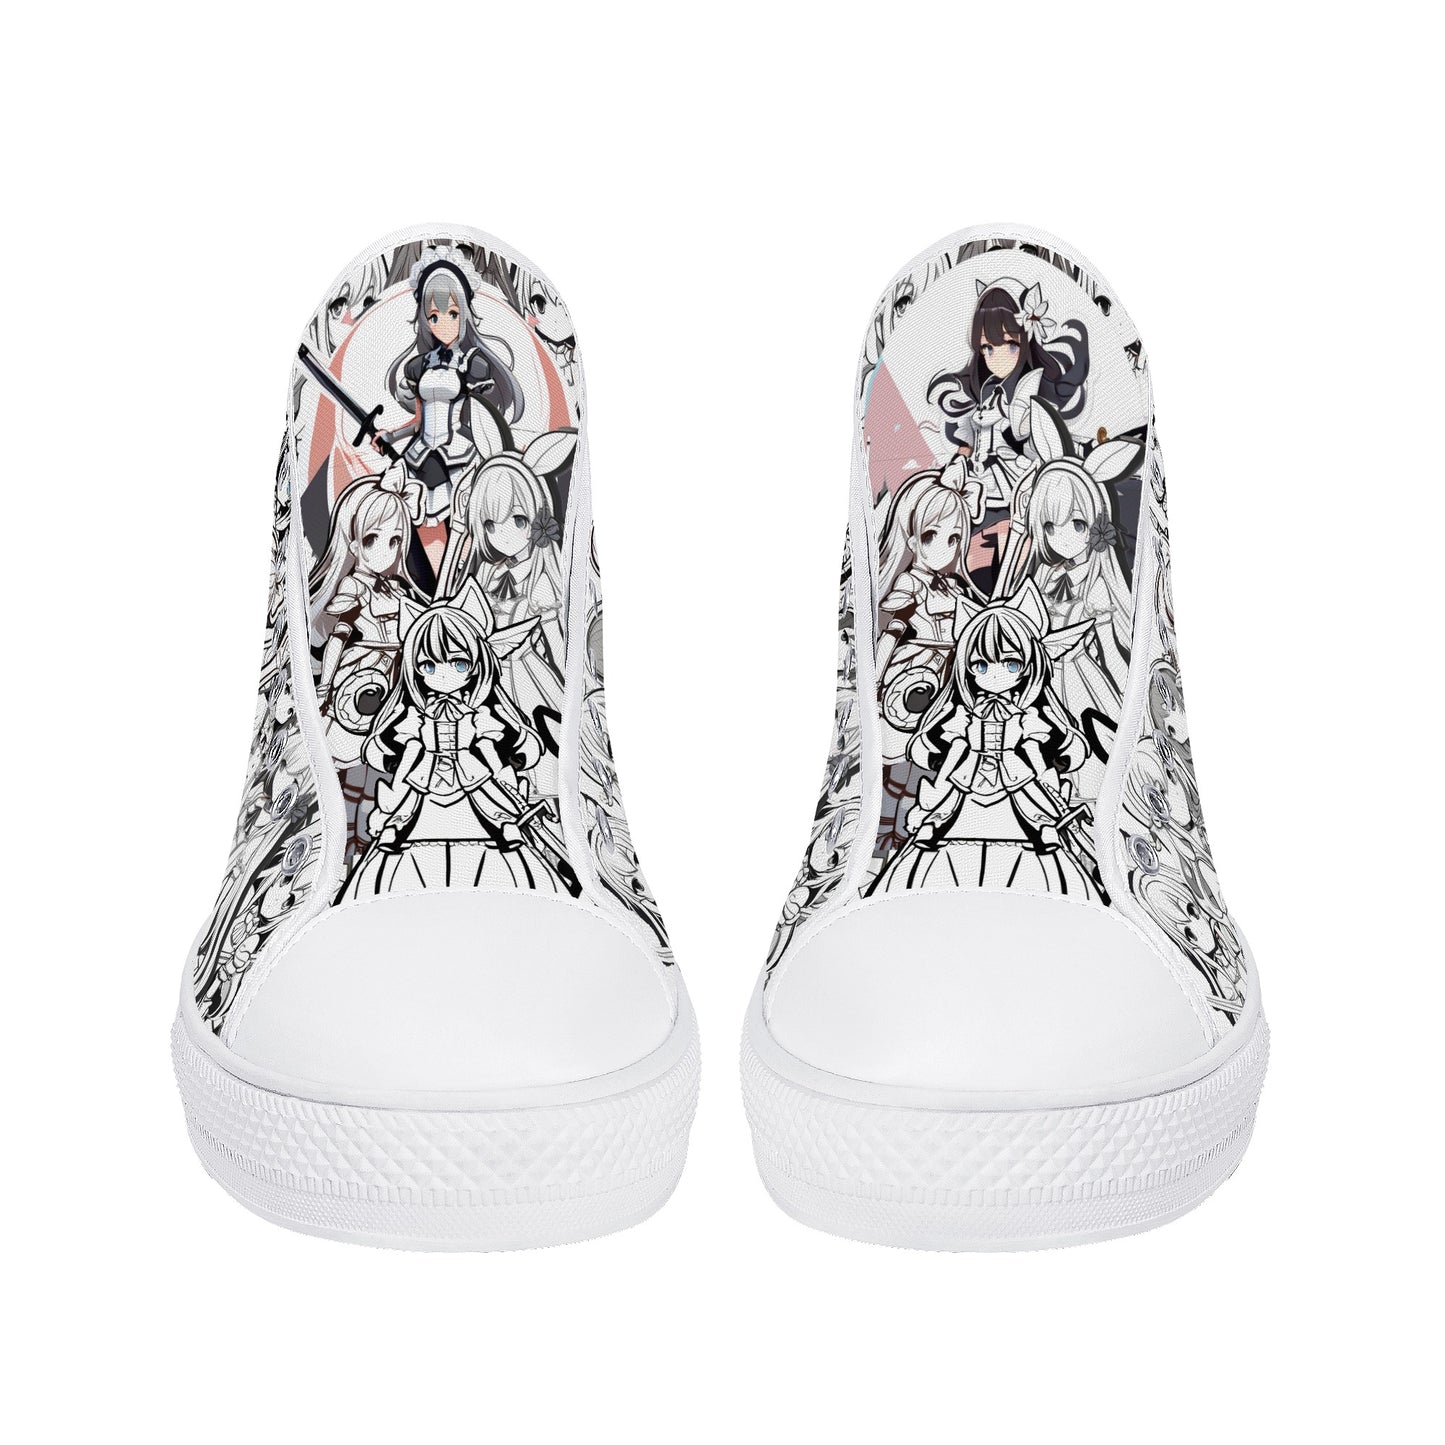 Anime Pattern Collection - Mens Classic High Top Canvas Shoes